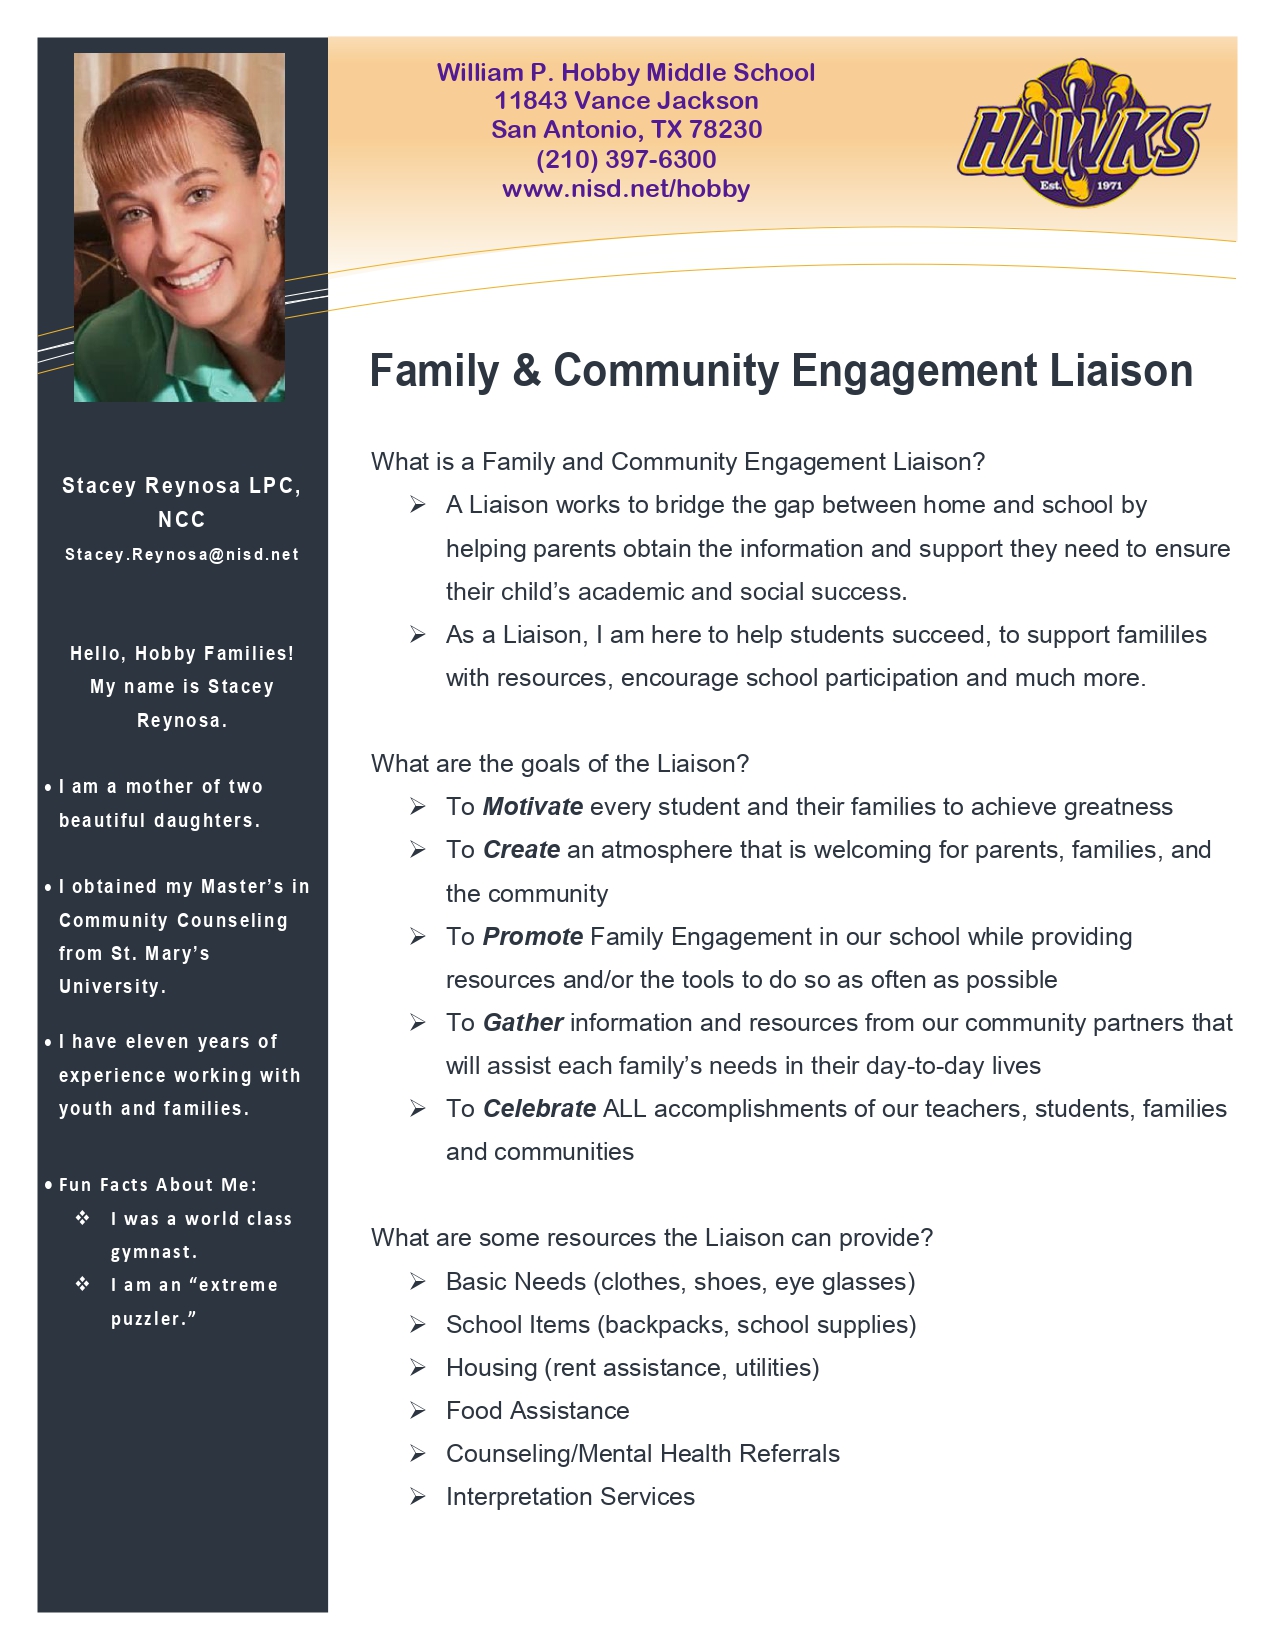 Welcome page for Stacey the family liaison at Hobby Middle School. has about information. Click here for more information